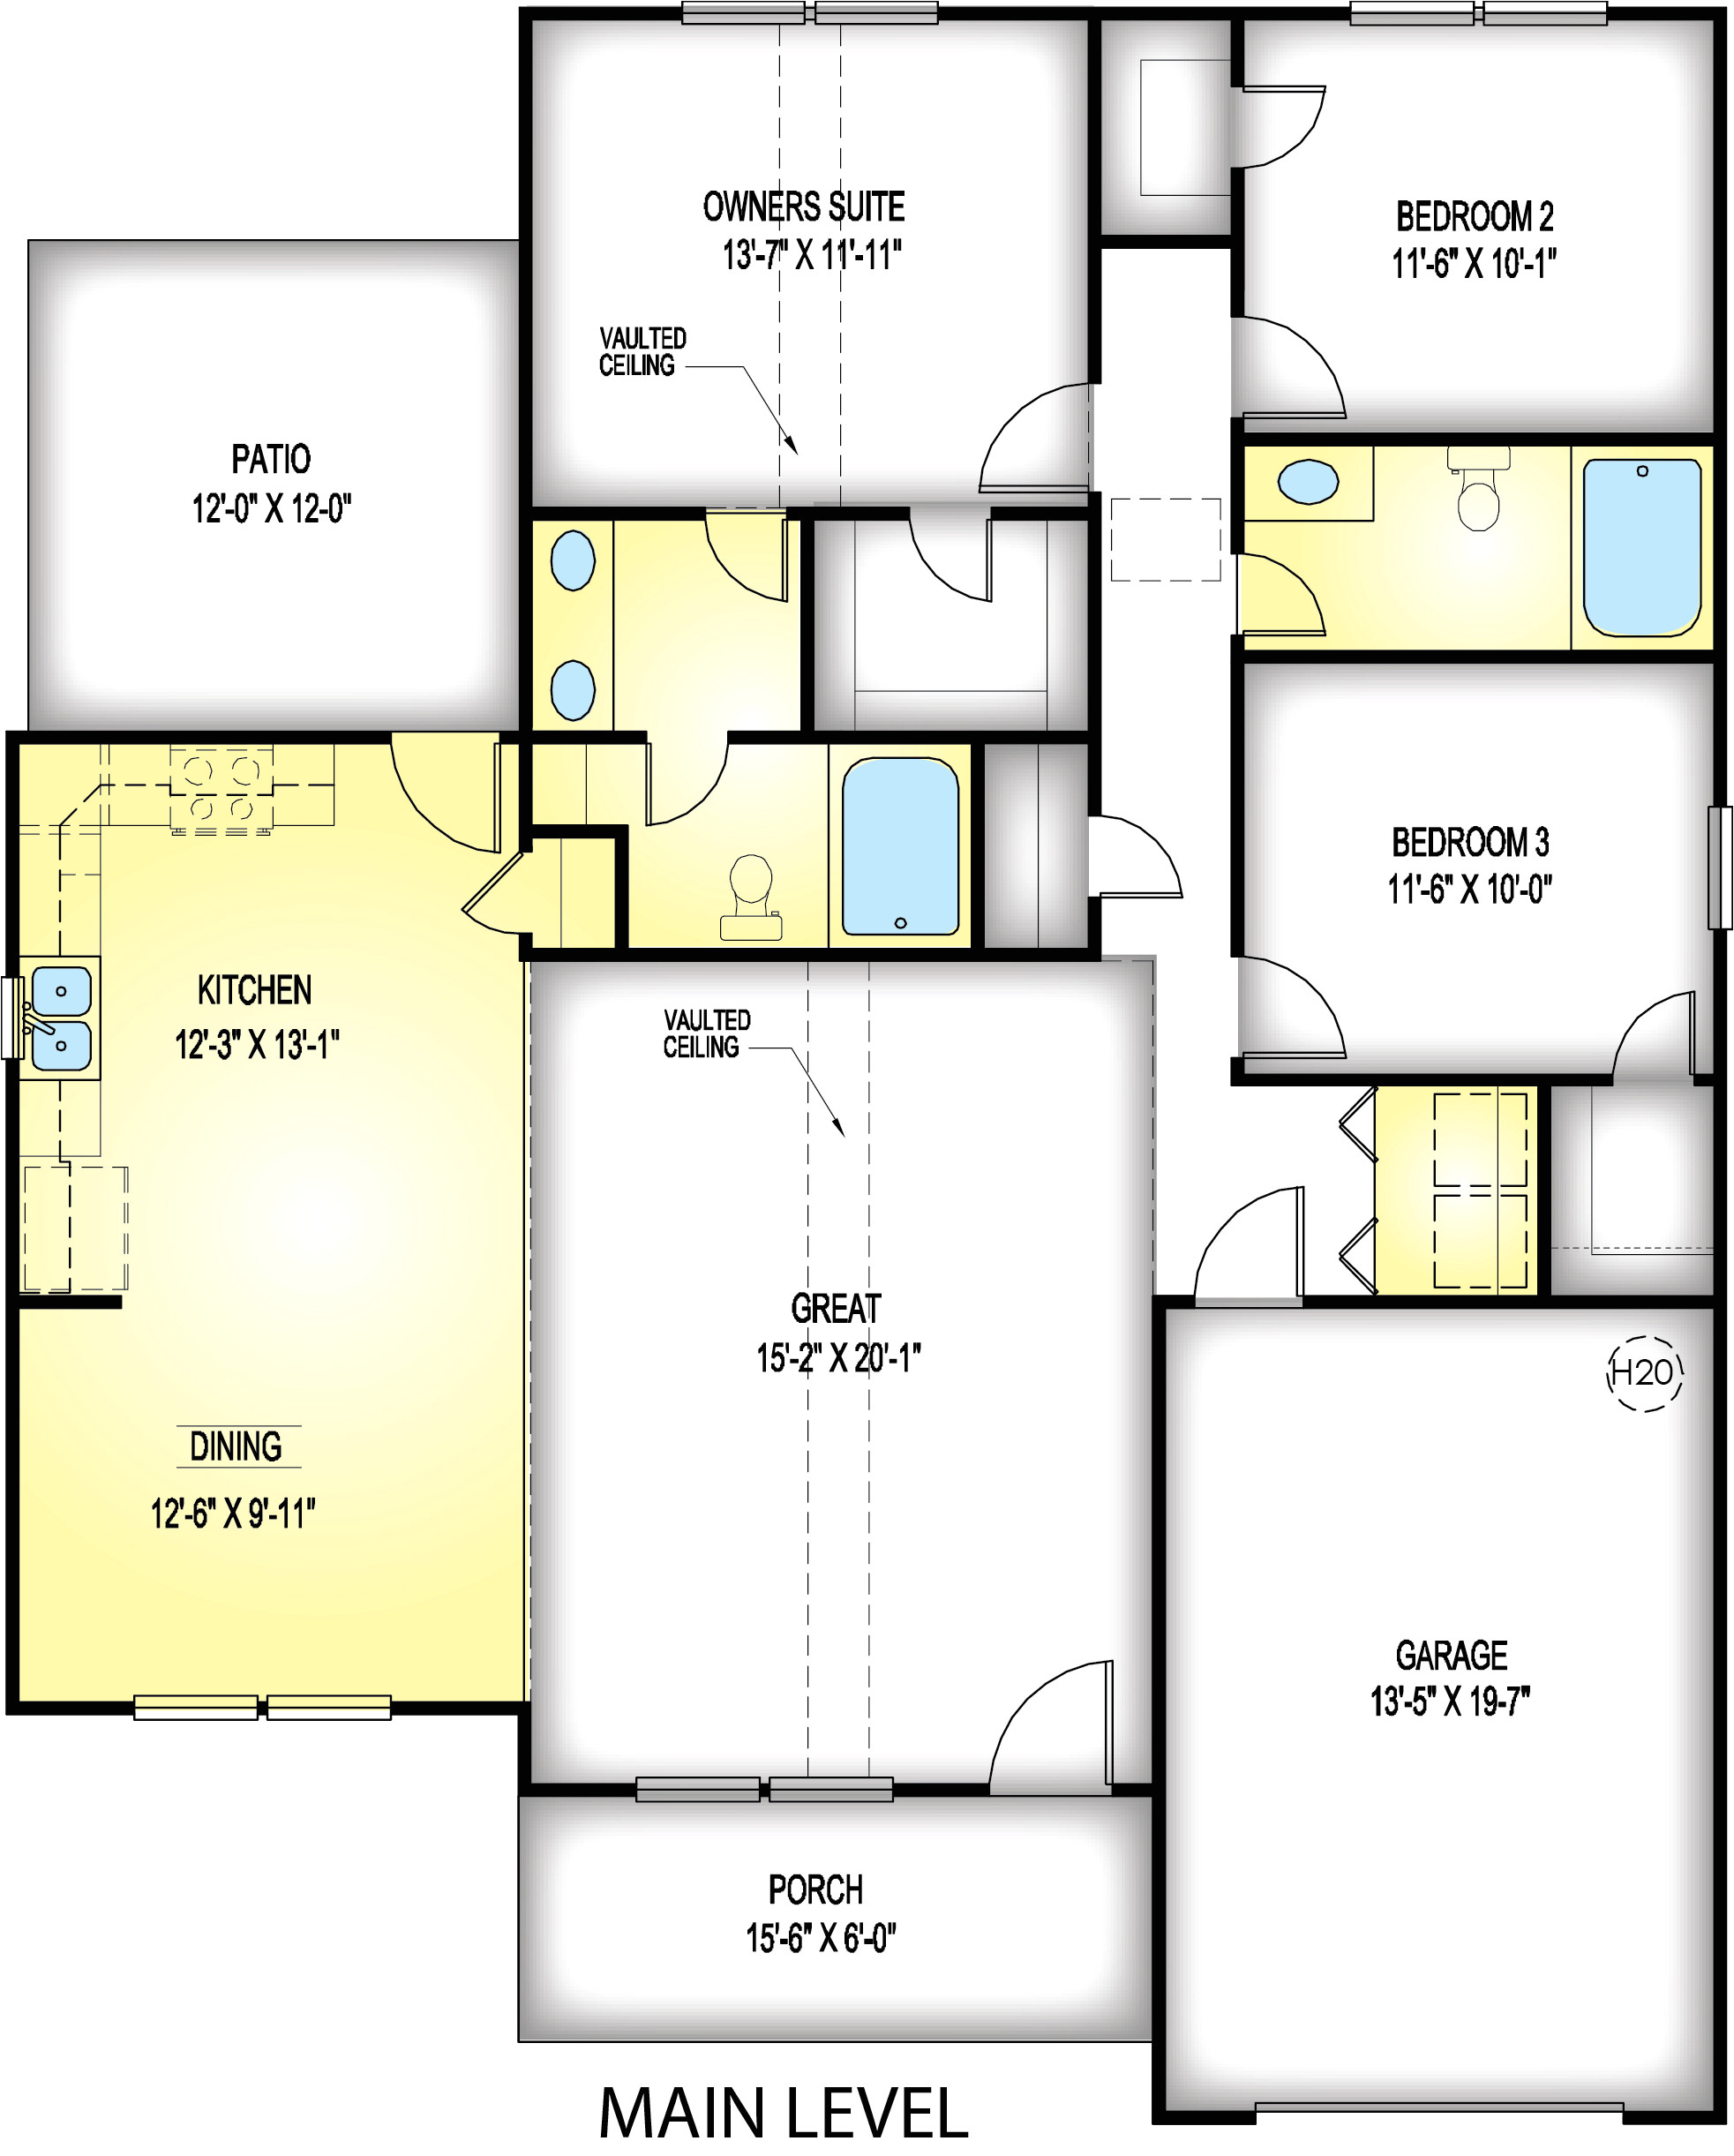 Great southern Homes Floor Plans Great southern Homes Floor Plans Floorplans Great